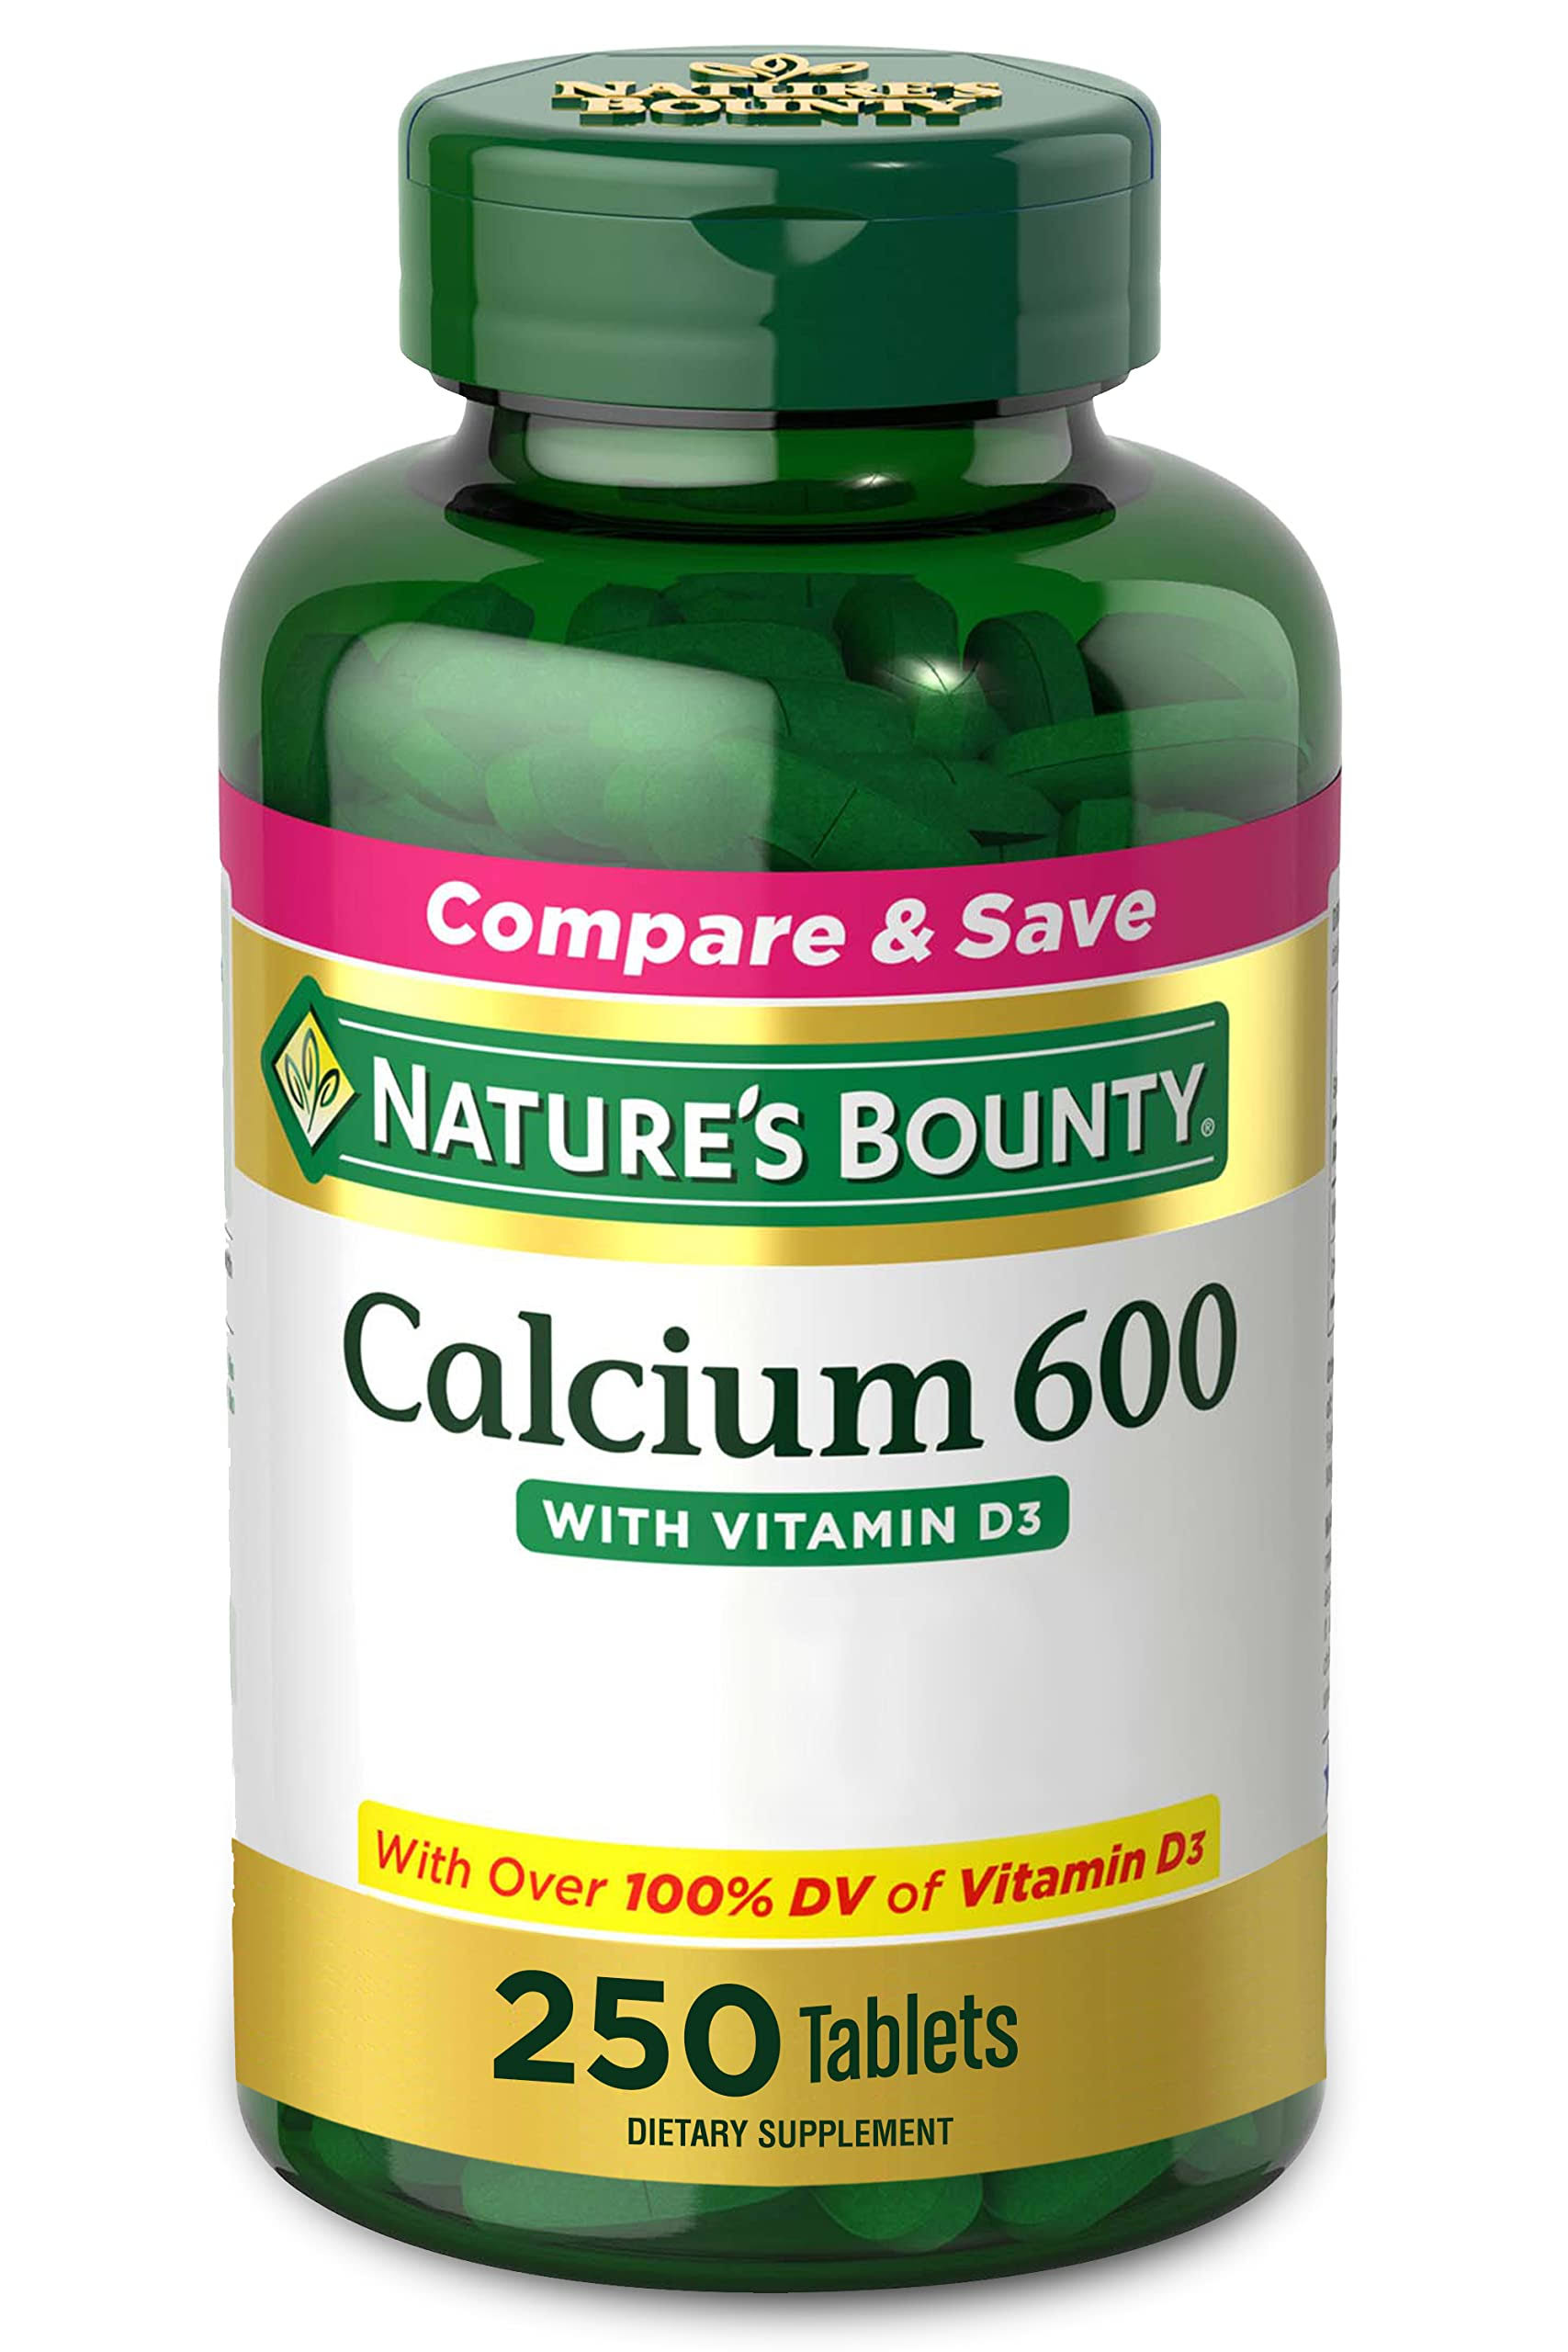 Nature's Bounty Calcium 600 with Vitamin D3 Dietary Supplement - 250 Tablets